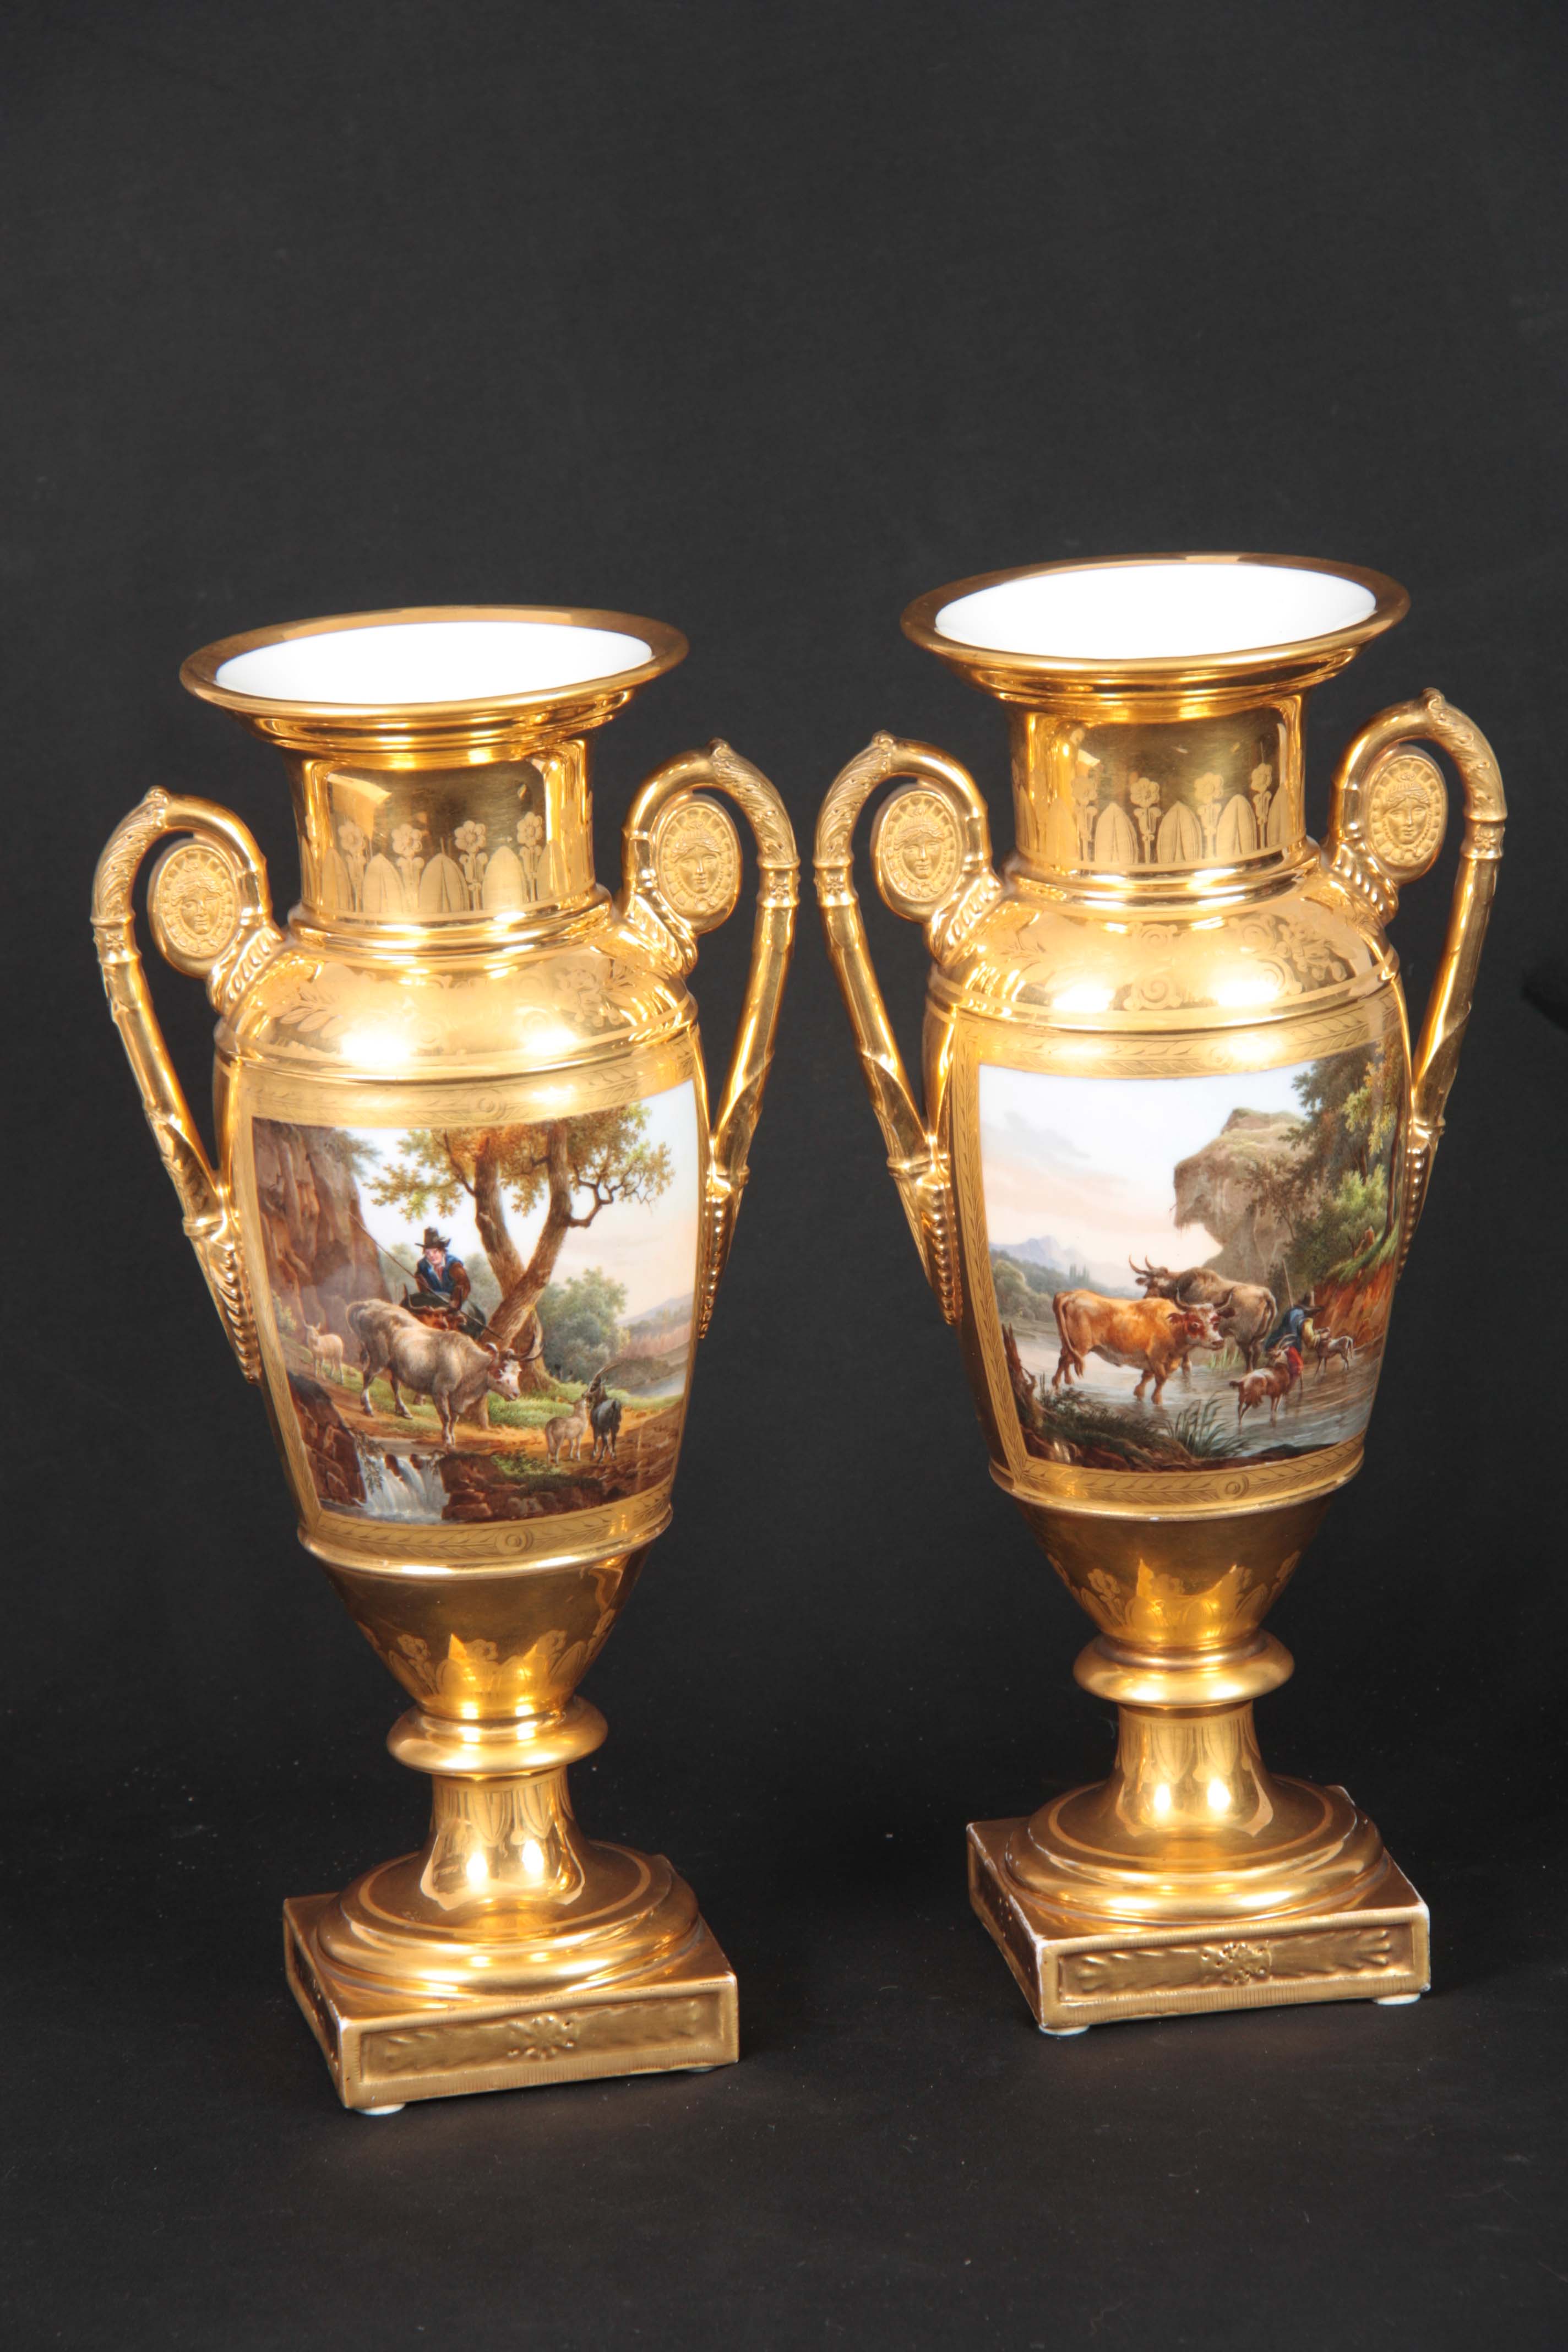 A PAIR OF EARLY 19TH CENTURY FRENCH EMPIRE PORCELAIN VASES of classical urn-shape with medallion-set - Image 4 of 12